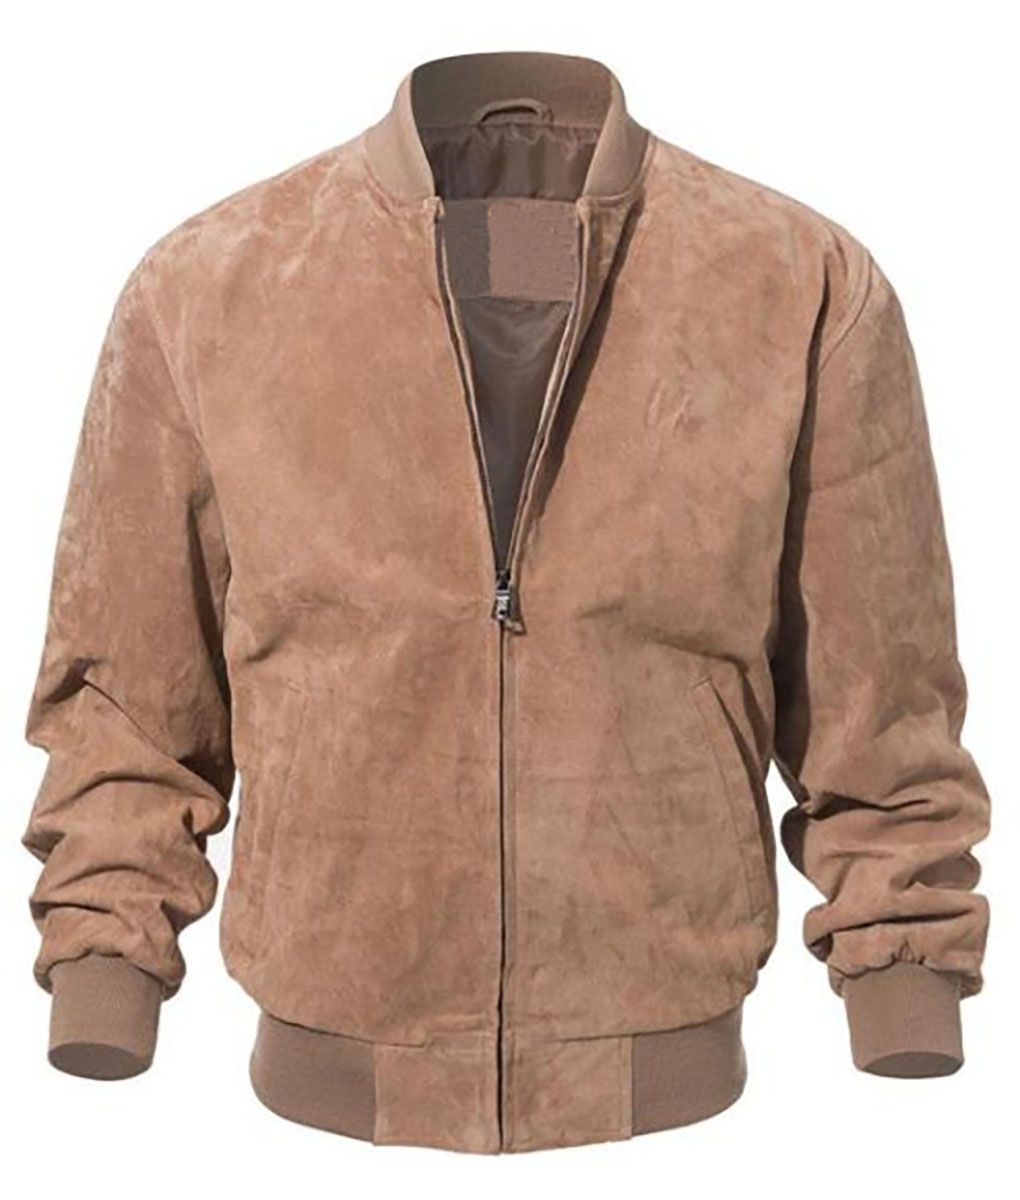 Donald Mens Suede Leather Bomber Jacket